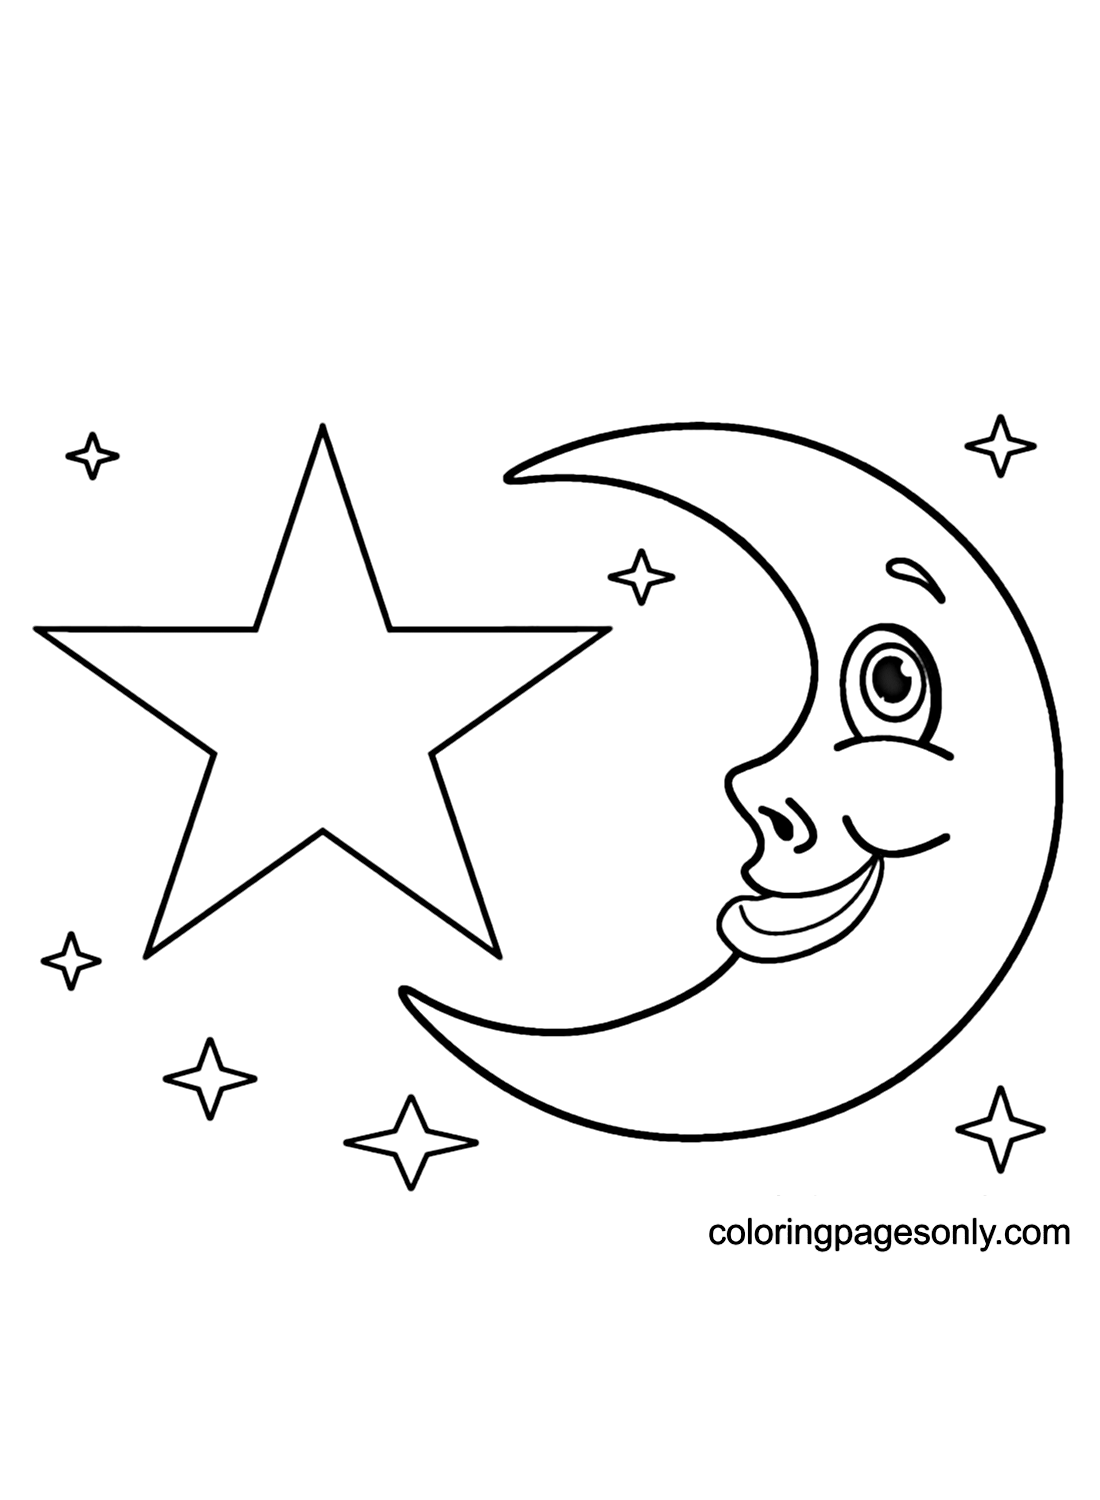 Stars and Moon Coloring Page